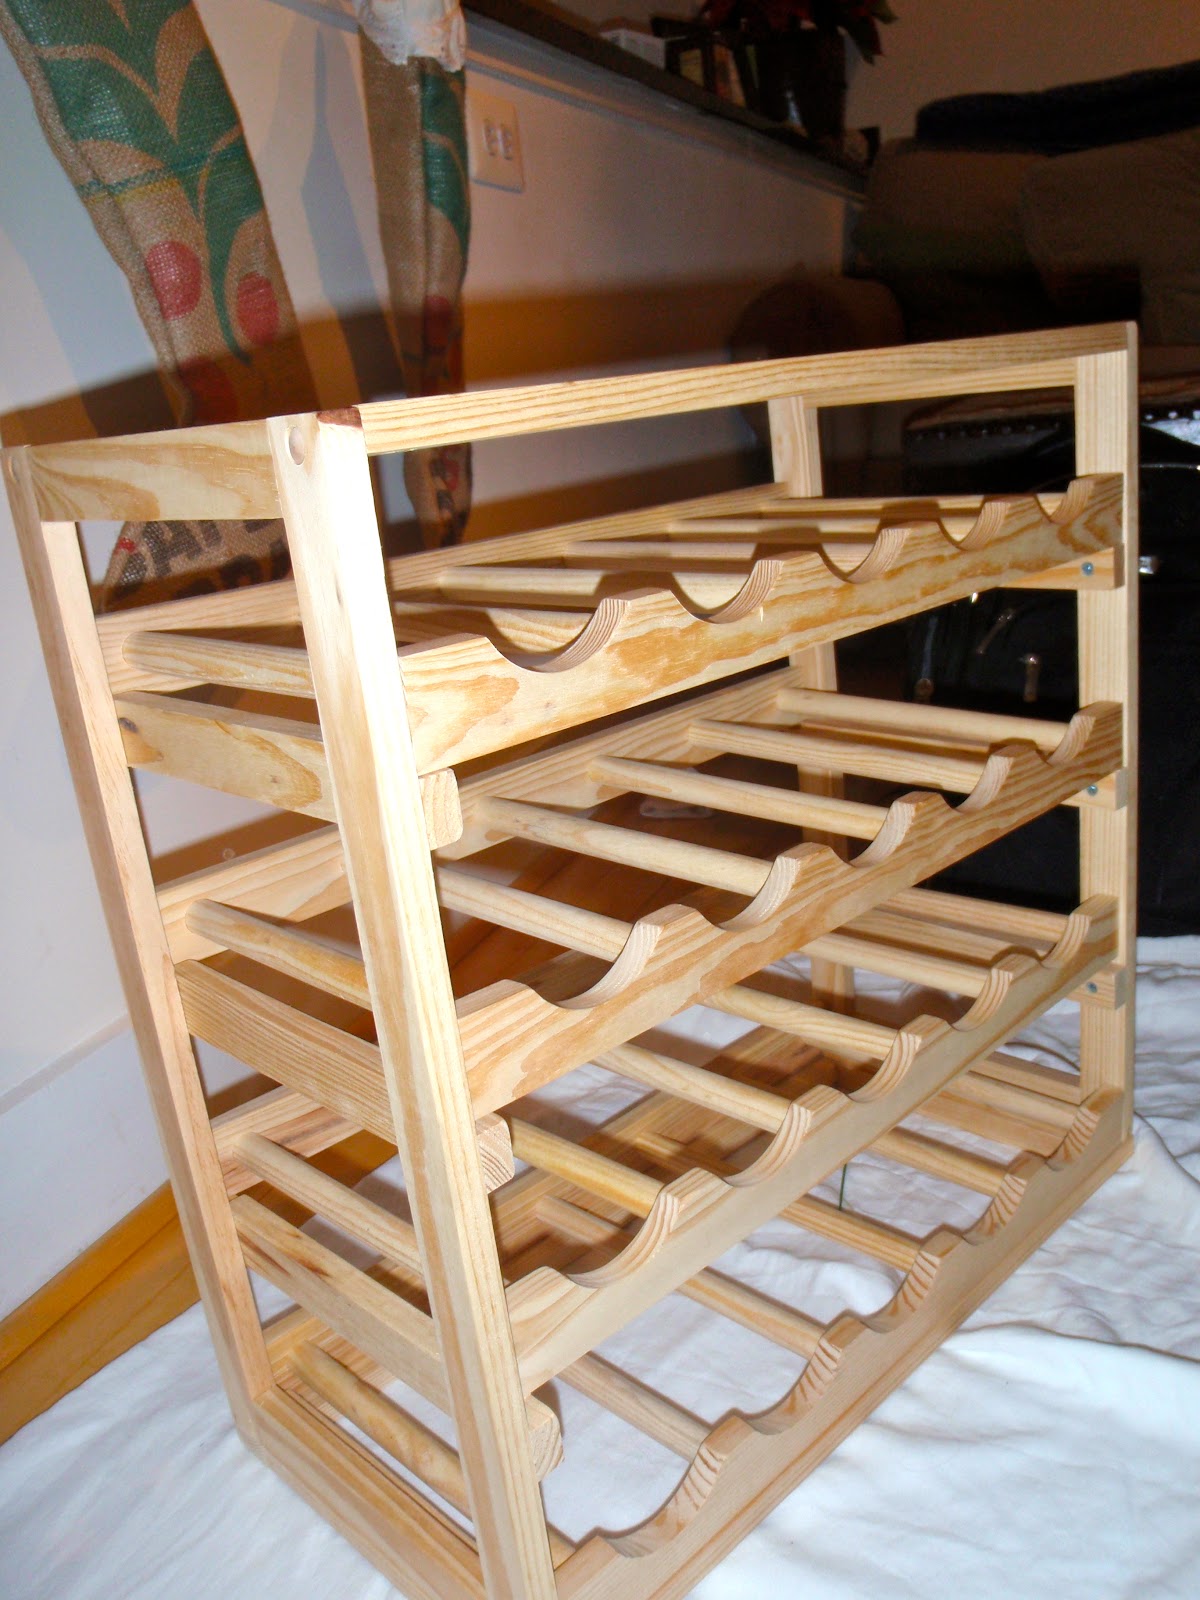 Best Woodworking Plans And Guide: Diy Wooden Wine Rack 